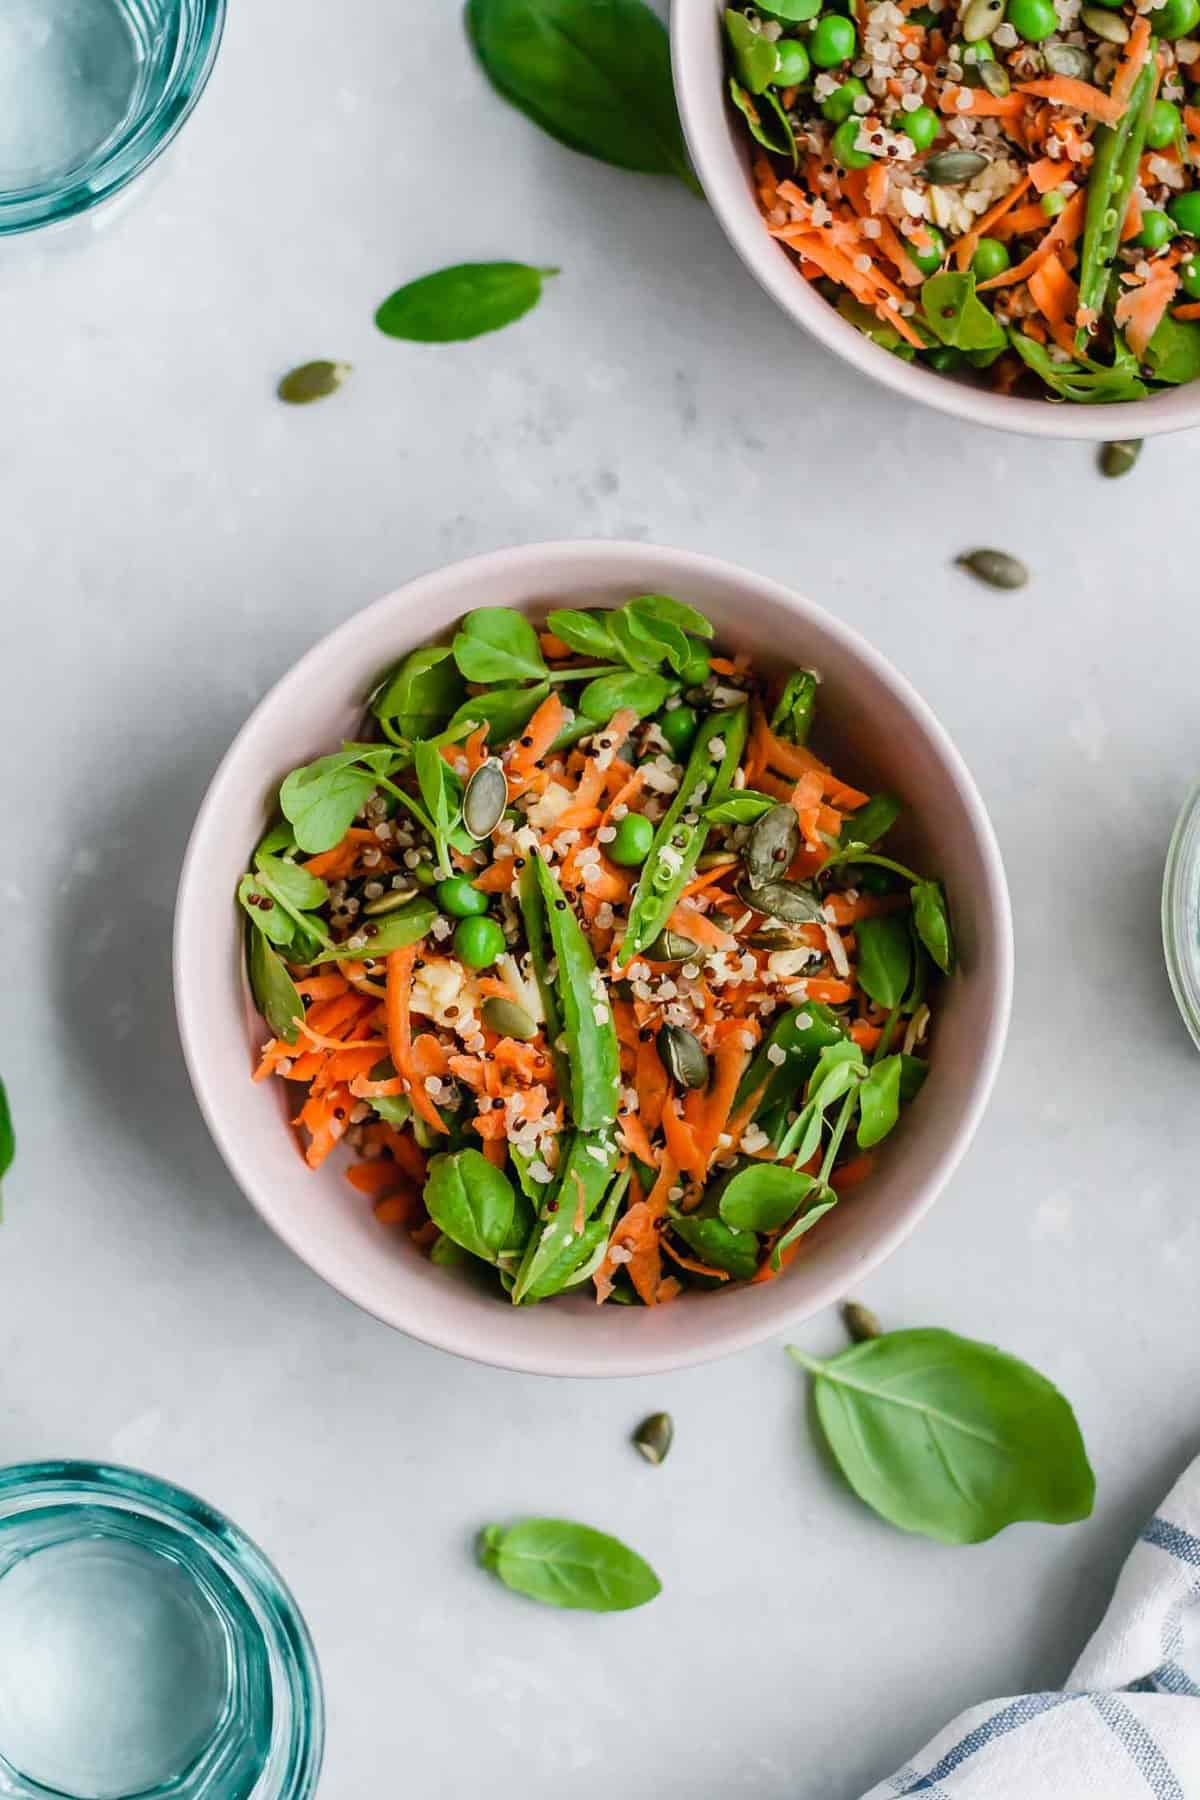 A bowl with Pea and Quinoa salad with some basil leaves around.